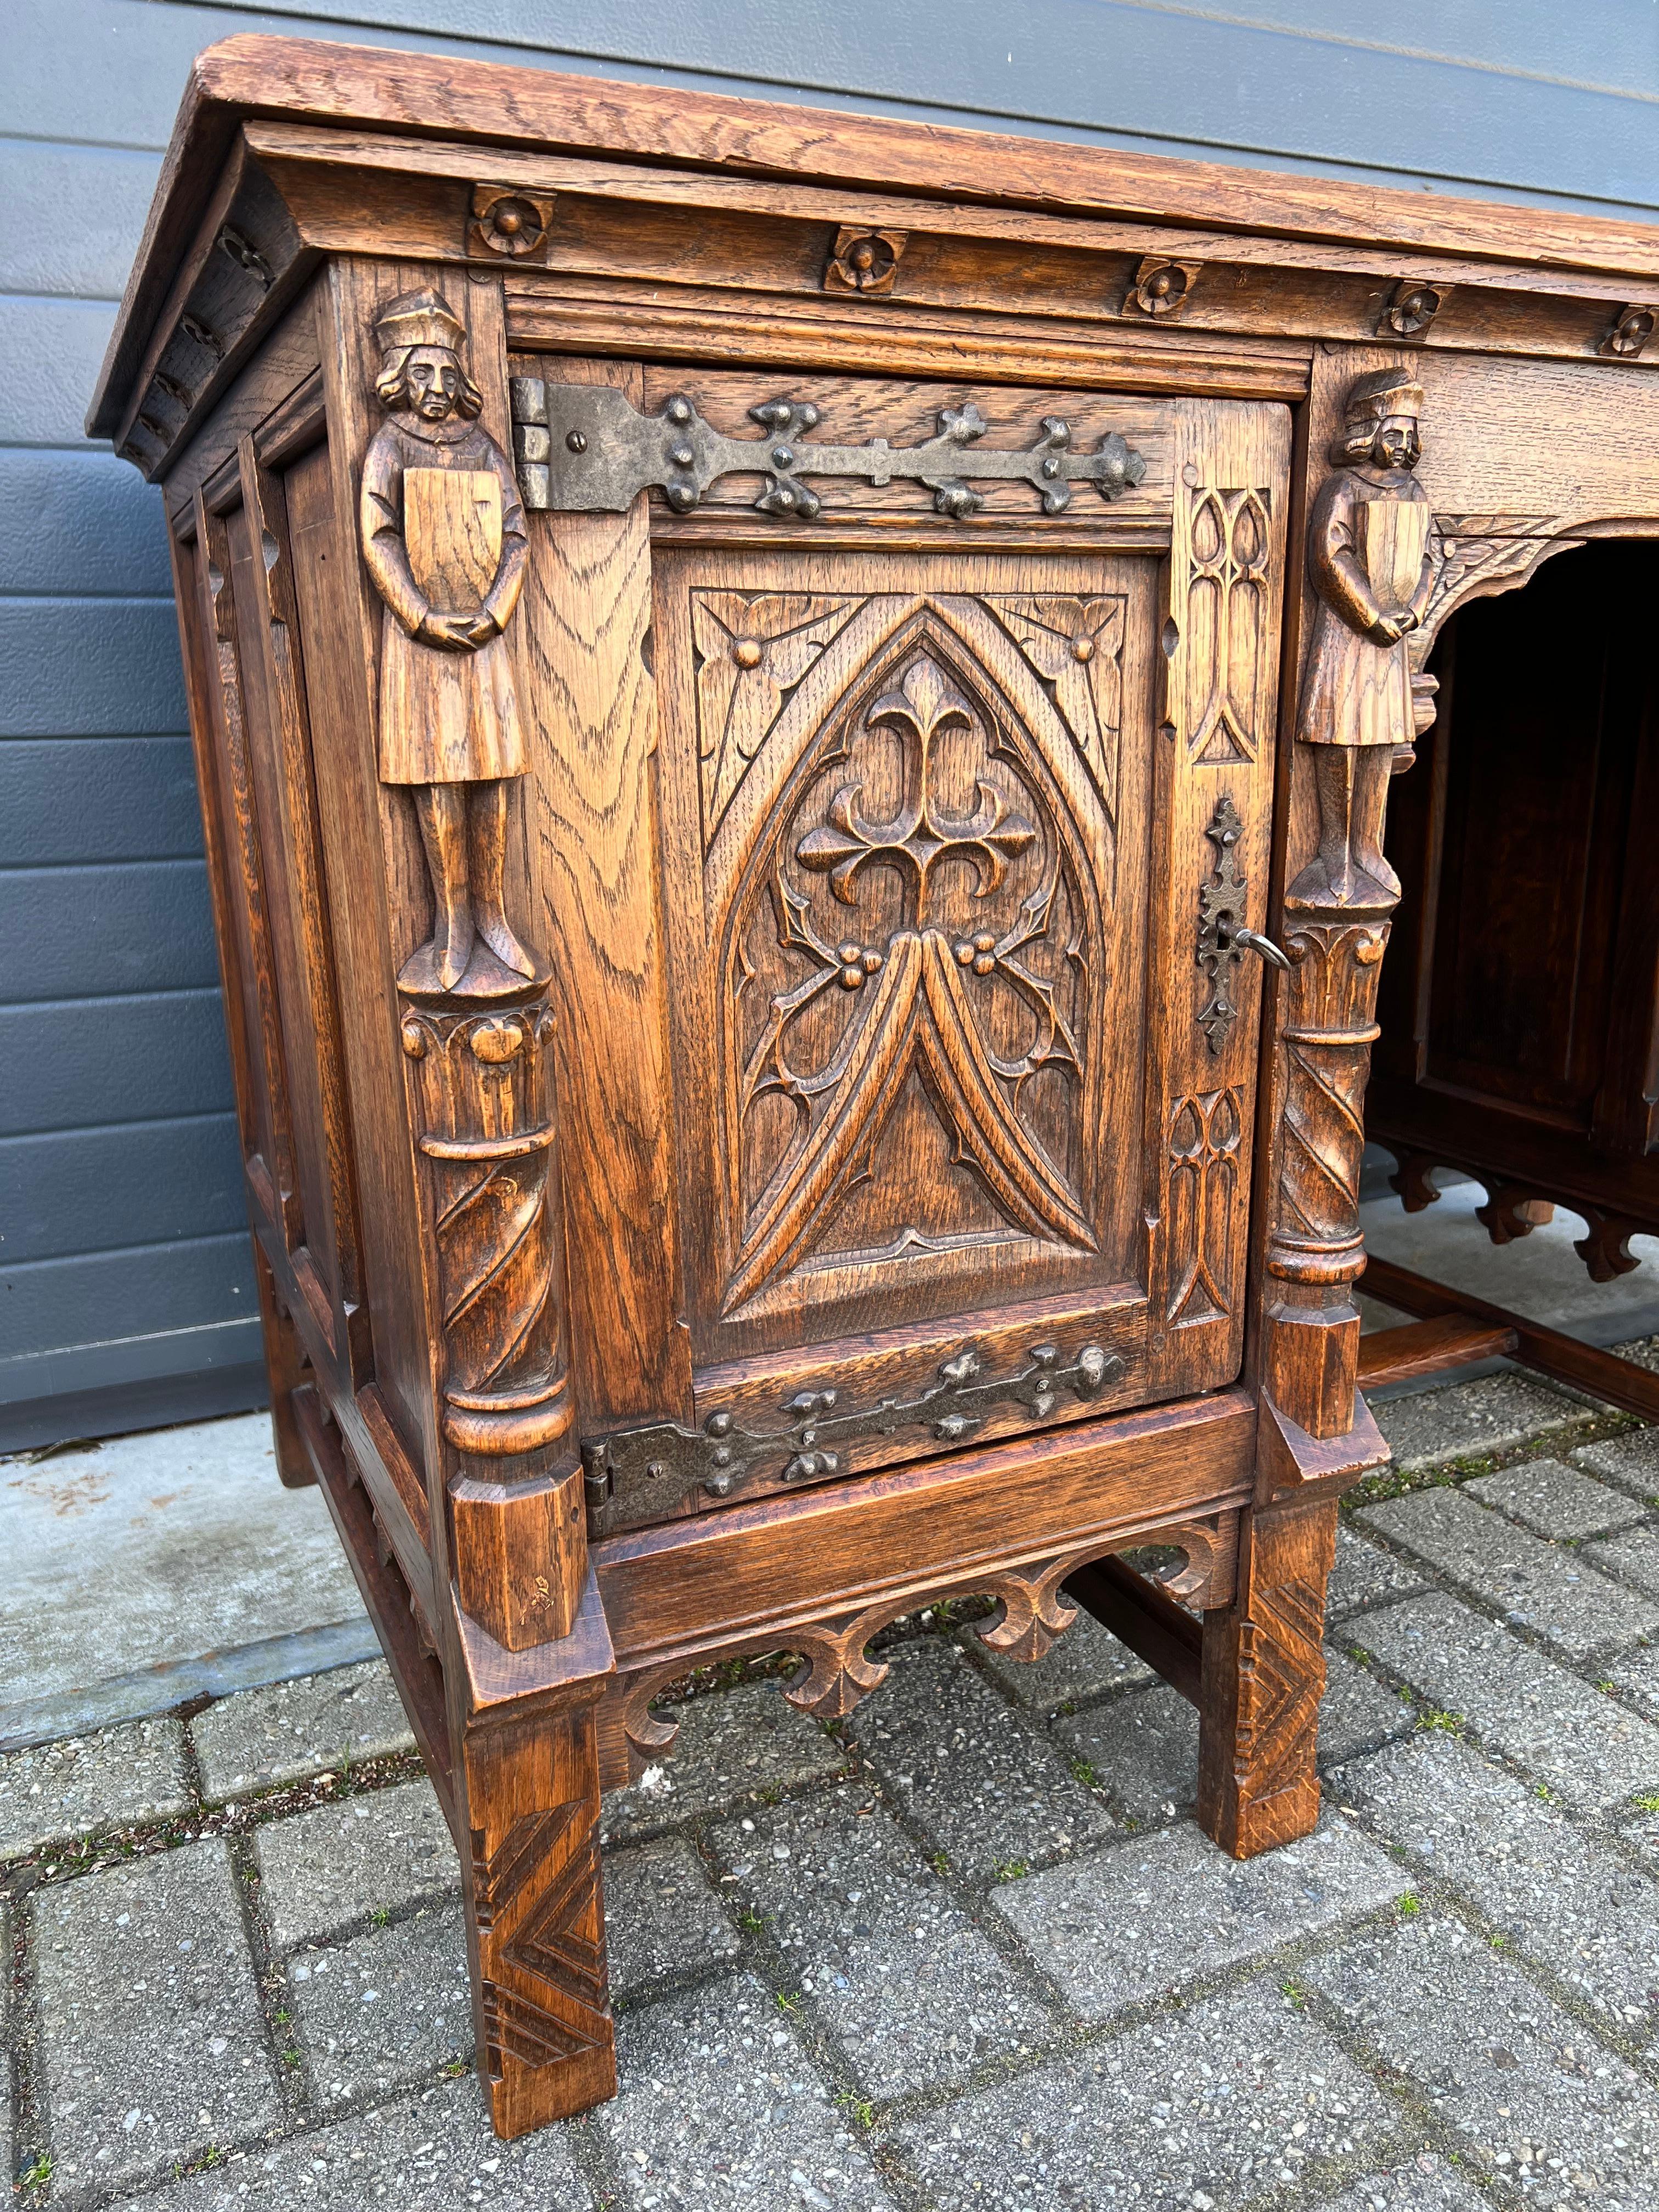 Hand-Crafted Outstanding Gothic Revival Desk w. Quality Carved Church Window Panels & Guards